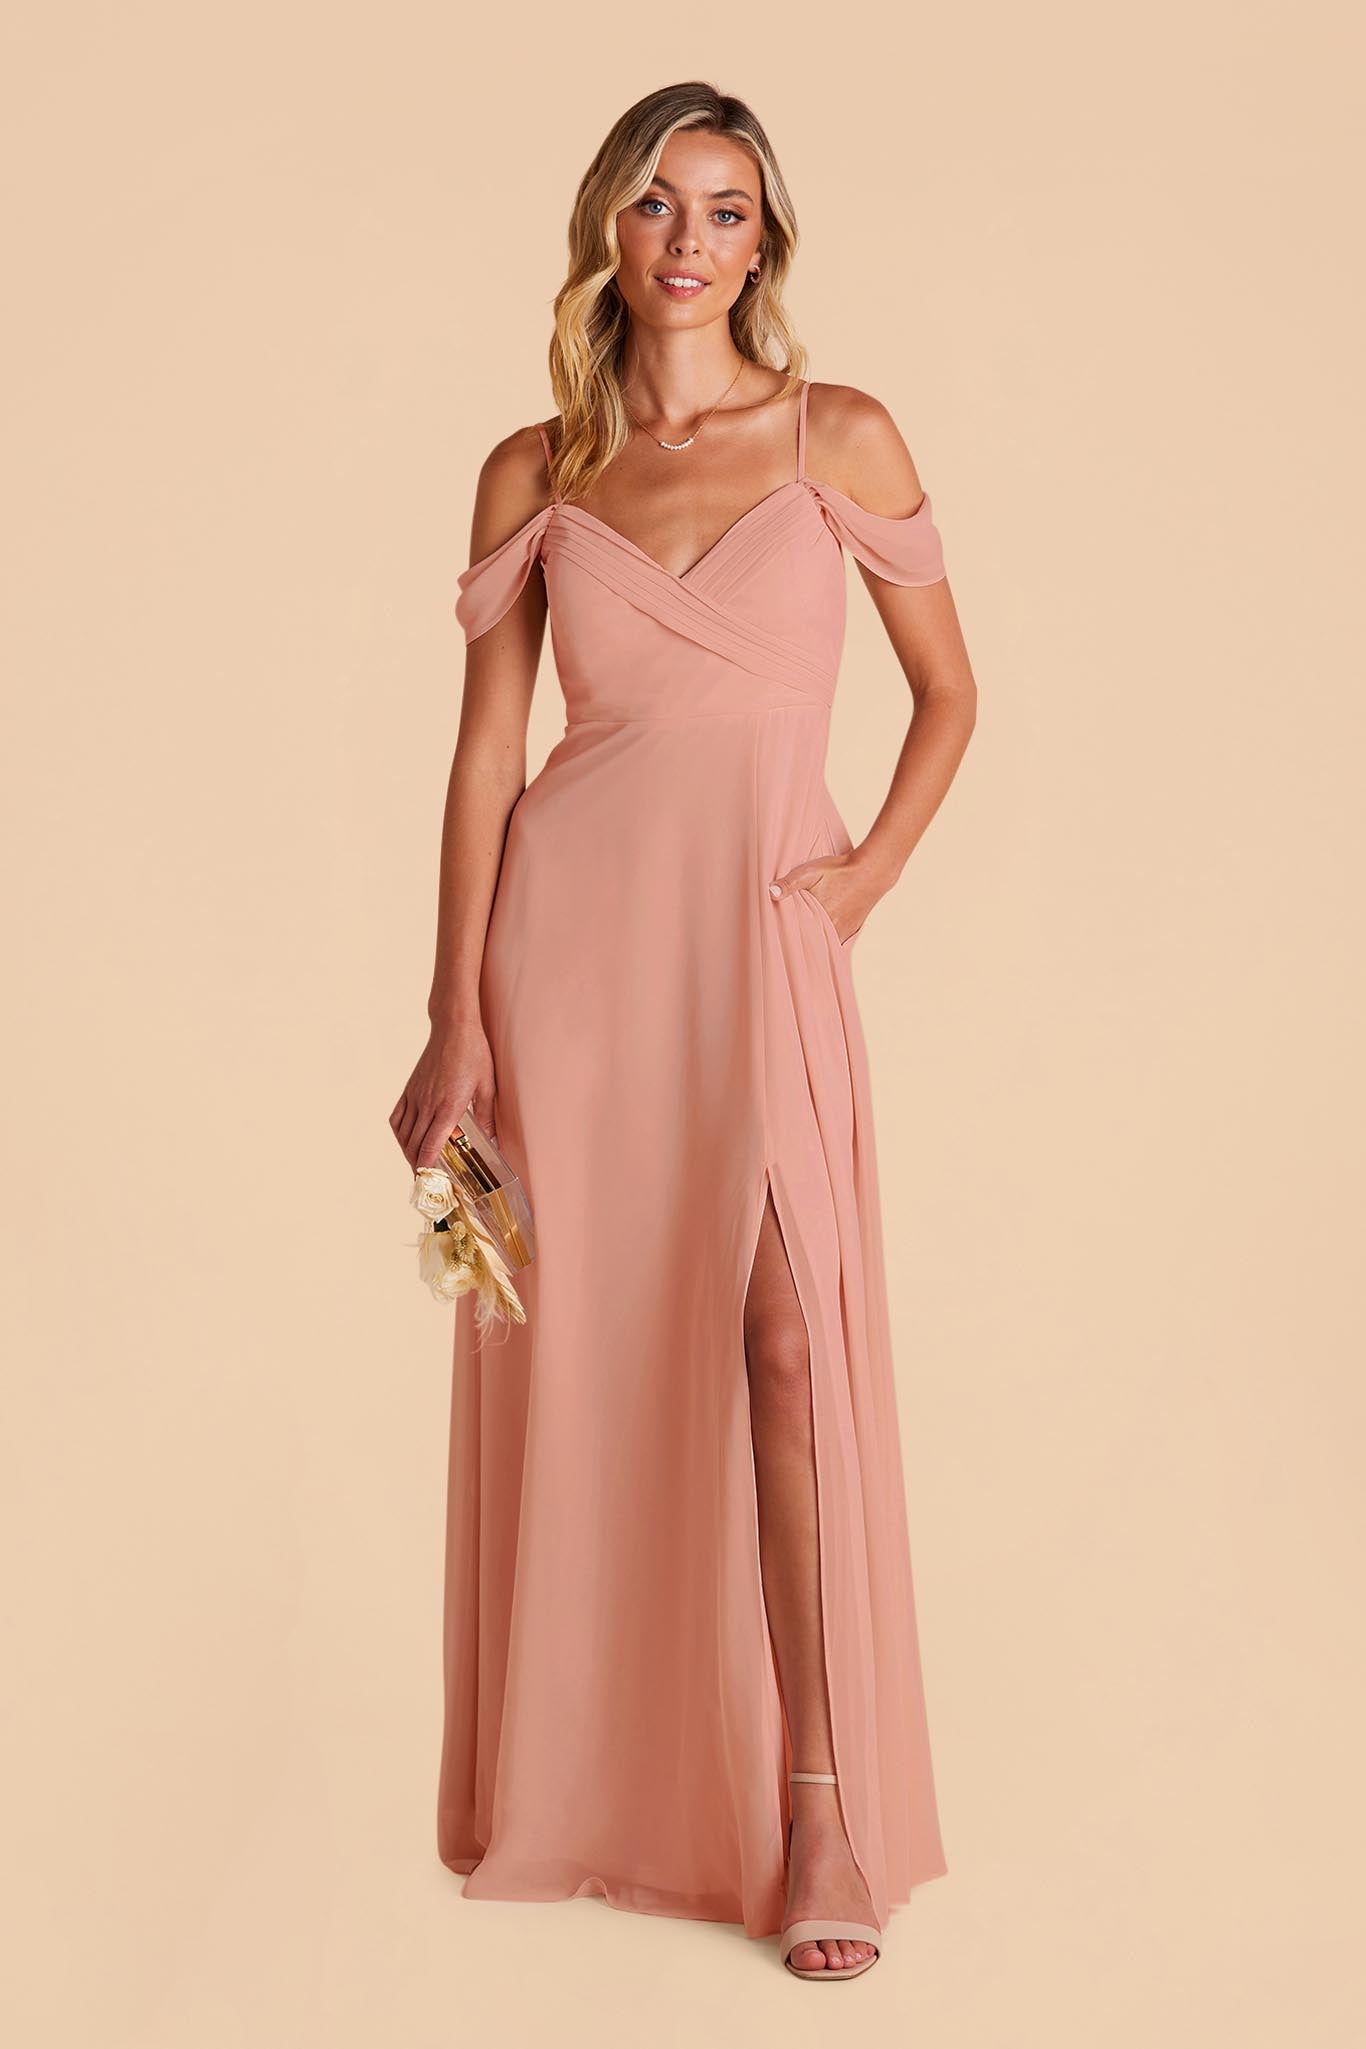 Spence Convertible Chiffon Bridesmaid Dress in Dusty Rose